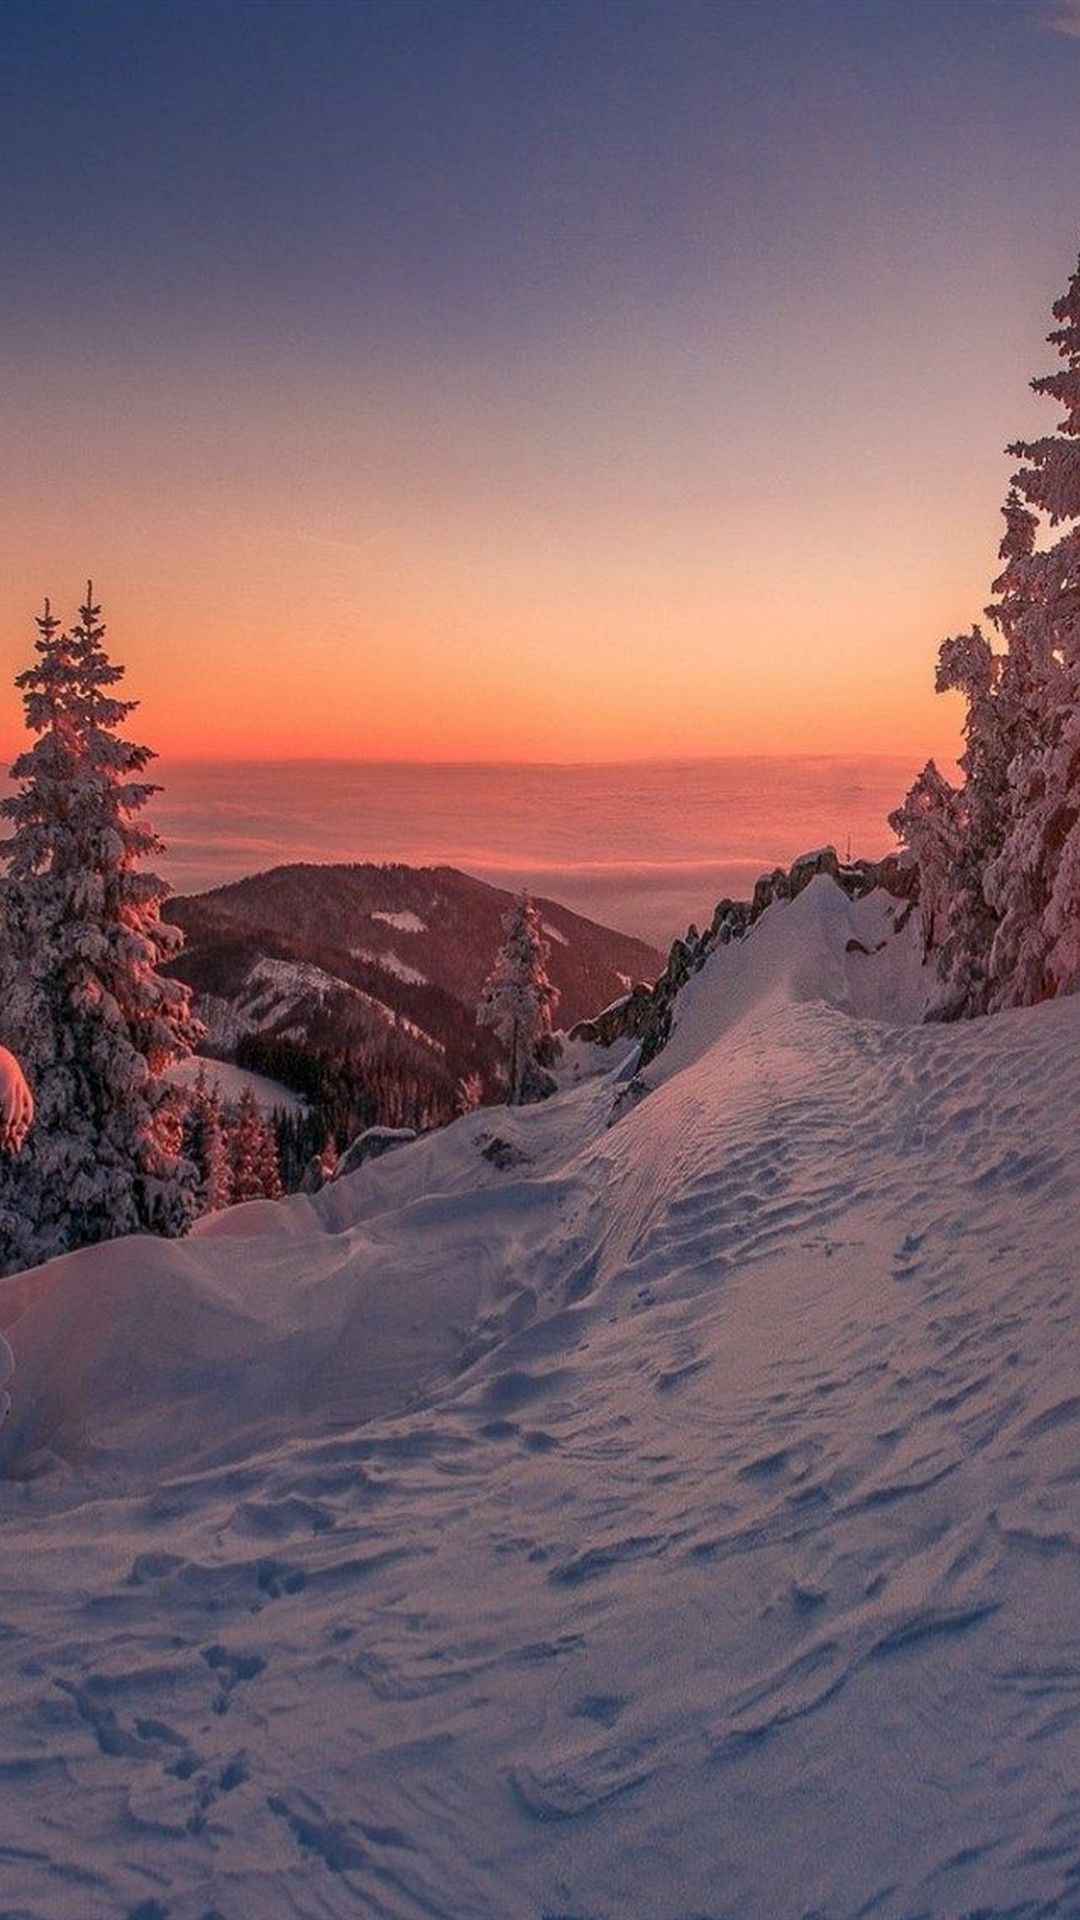 A snowy mountain with trees and a beautiful sunset - Winter, snow